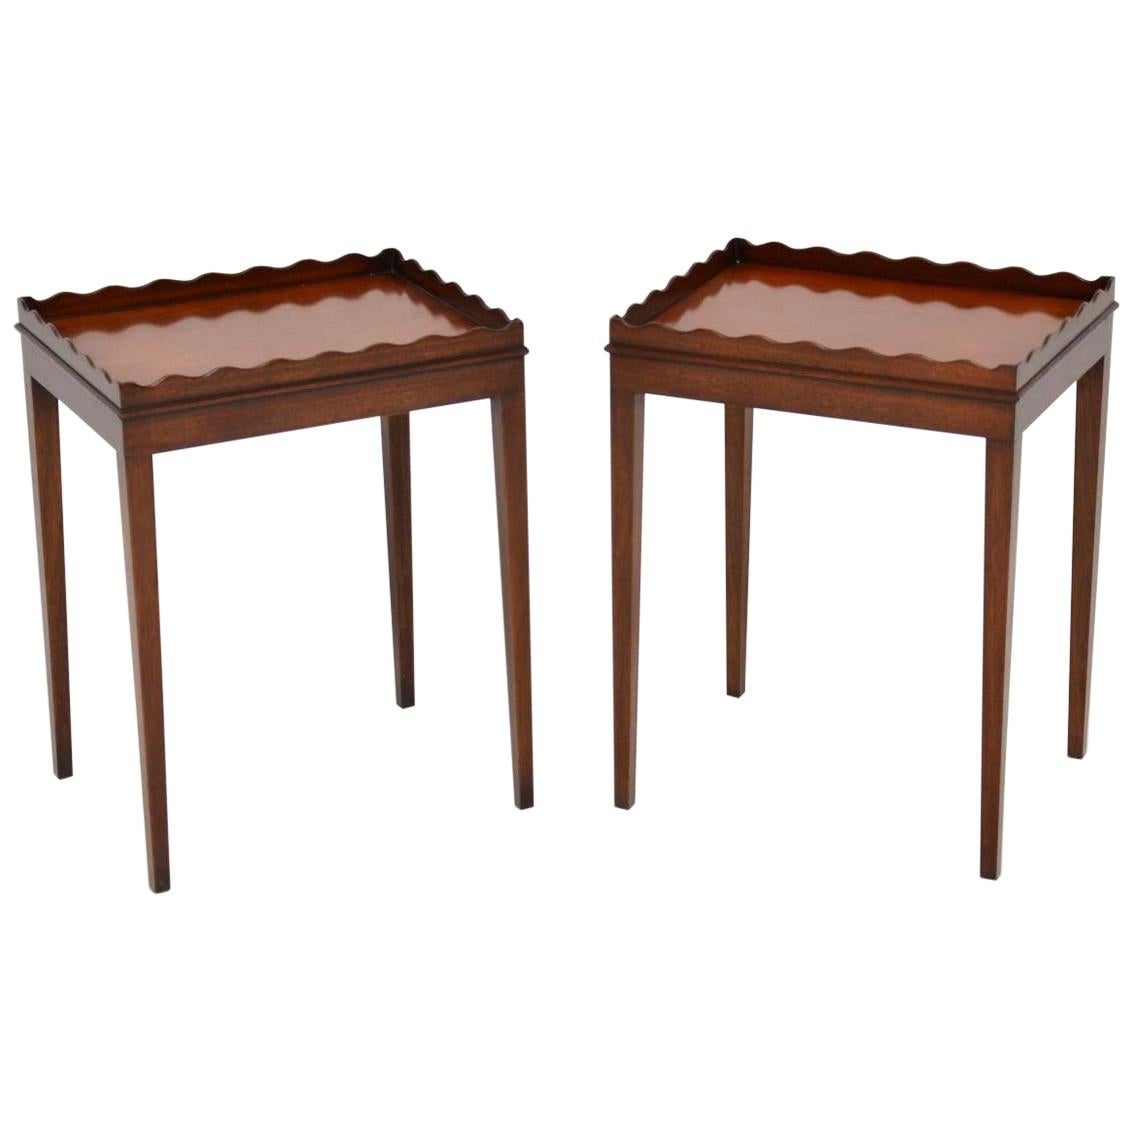 Pair of Antique Georgian Style Mahogany Side Tables